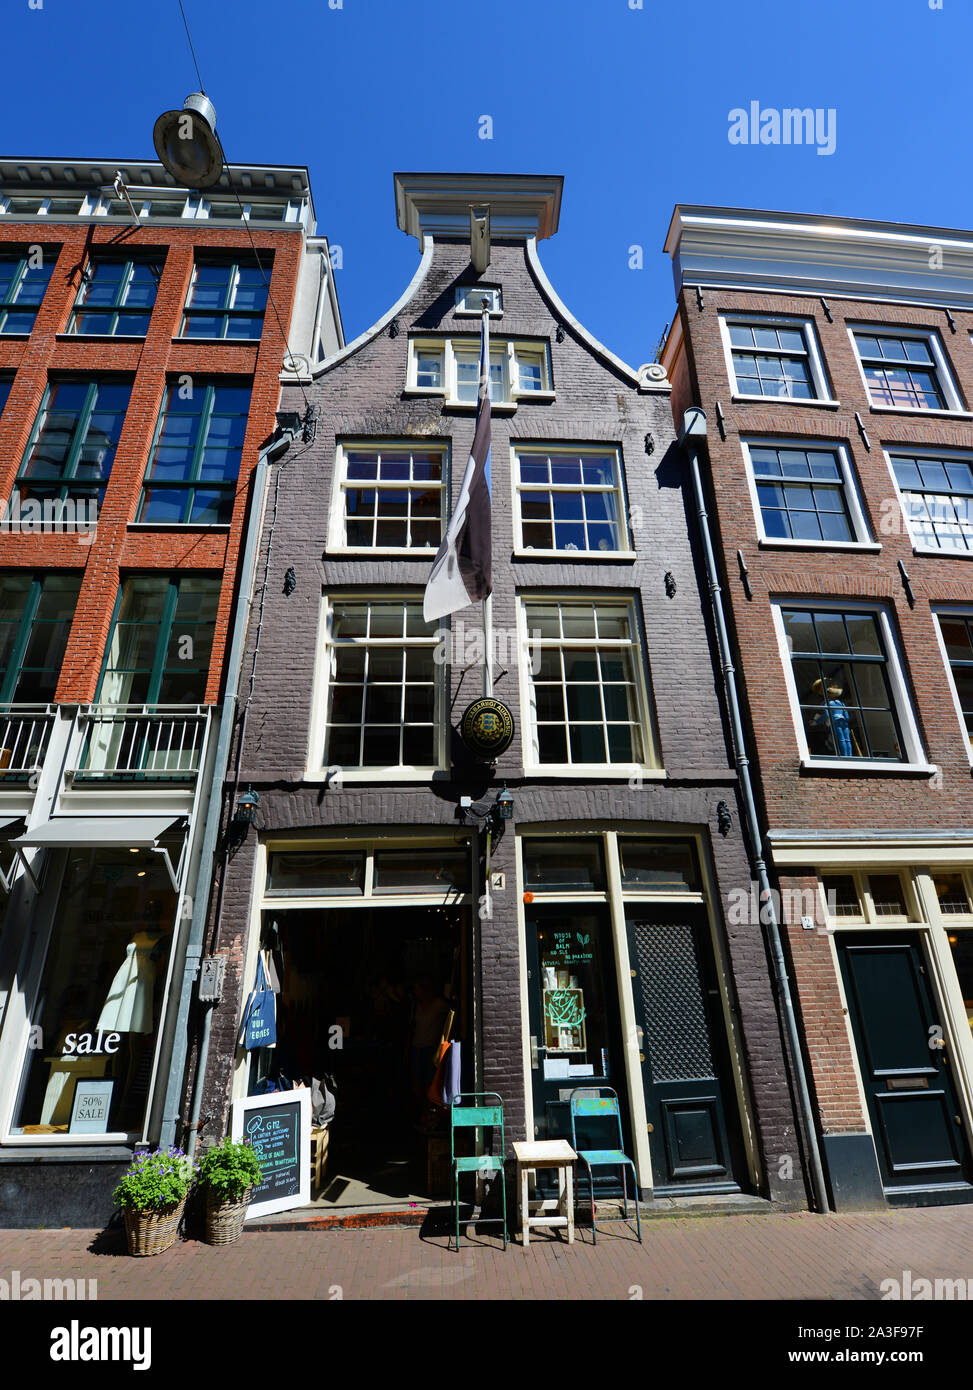 Beautiful old buildings in Amsterdam, Holland. Stock Photo